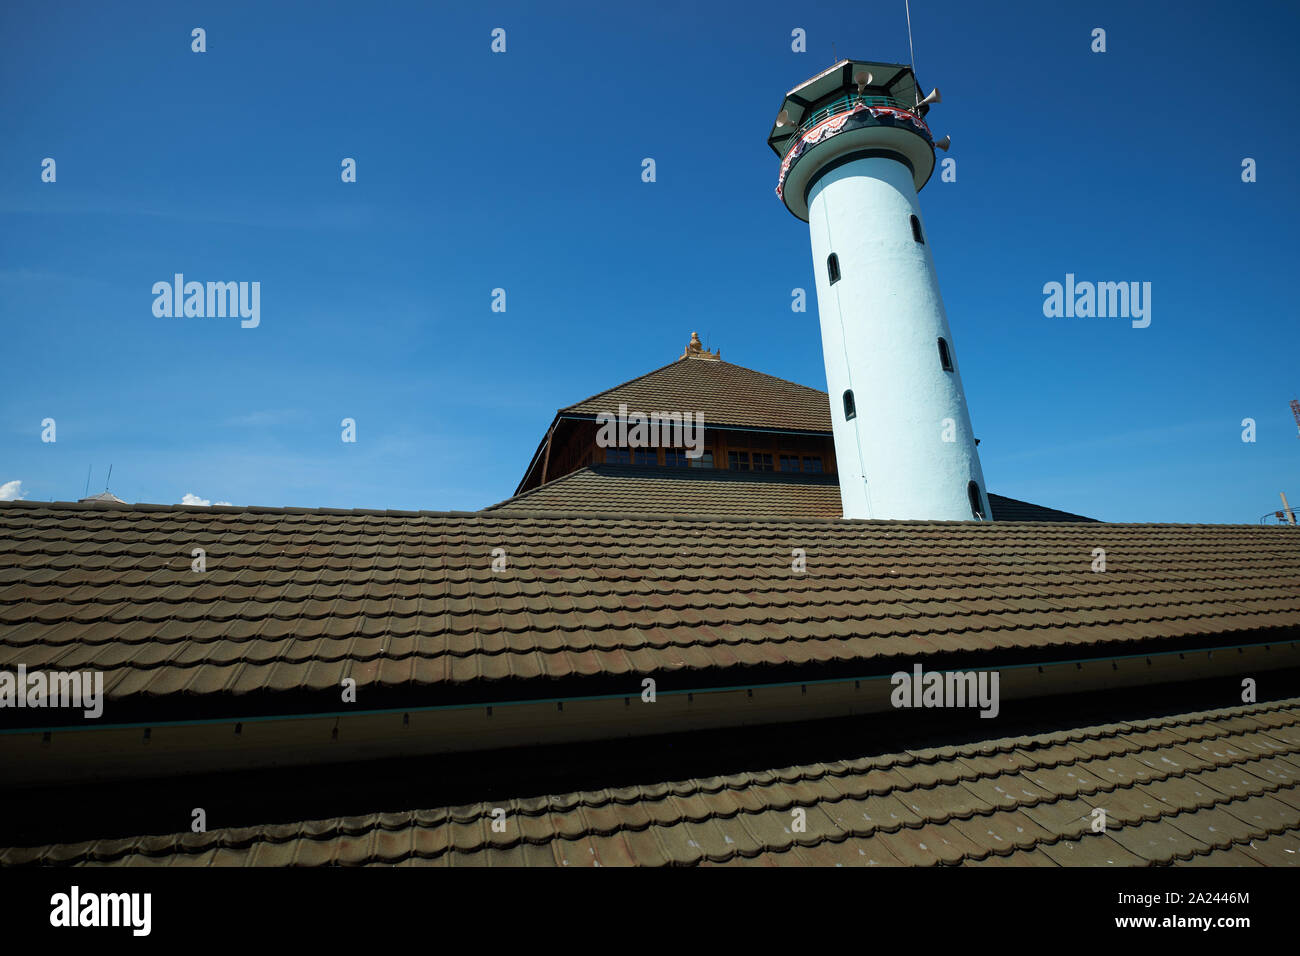 Exterior with towering white minaret of the old, central mosque, Sunan Ampel. In Surabaya, Indonesia. Stock Photo